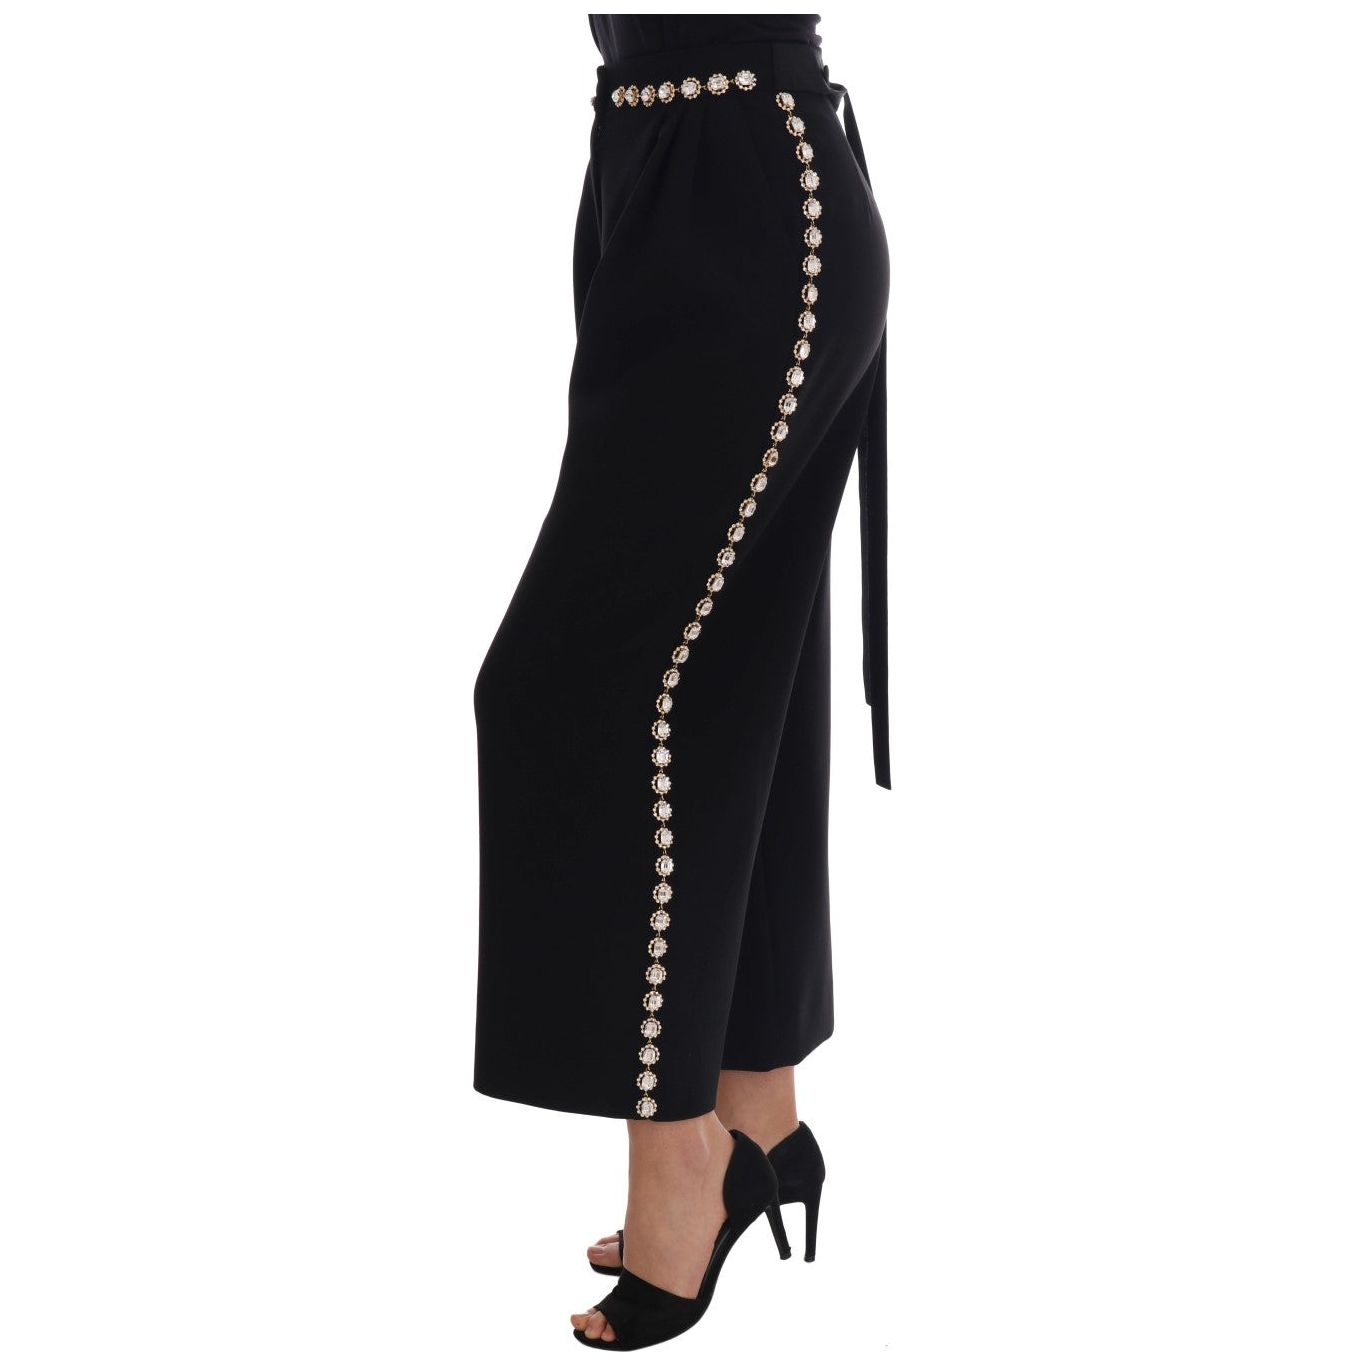 Dolce & Gabbana Elegant High-Waist Ankle Pants with Gold Detailing black-wool-stretch-crystal-pants Jeans & Pants 513120-black-wool-stretch-crystal-pants-1.jpg